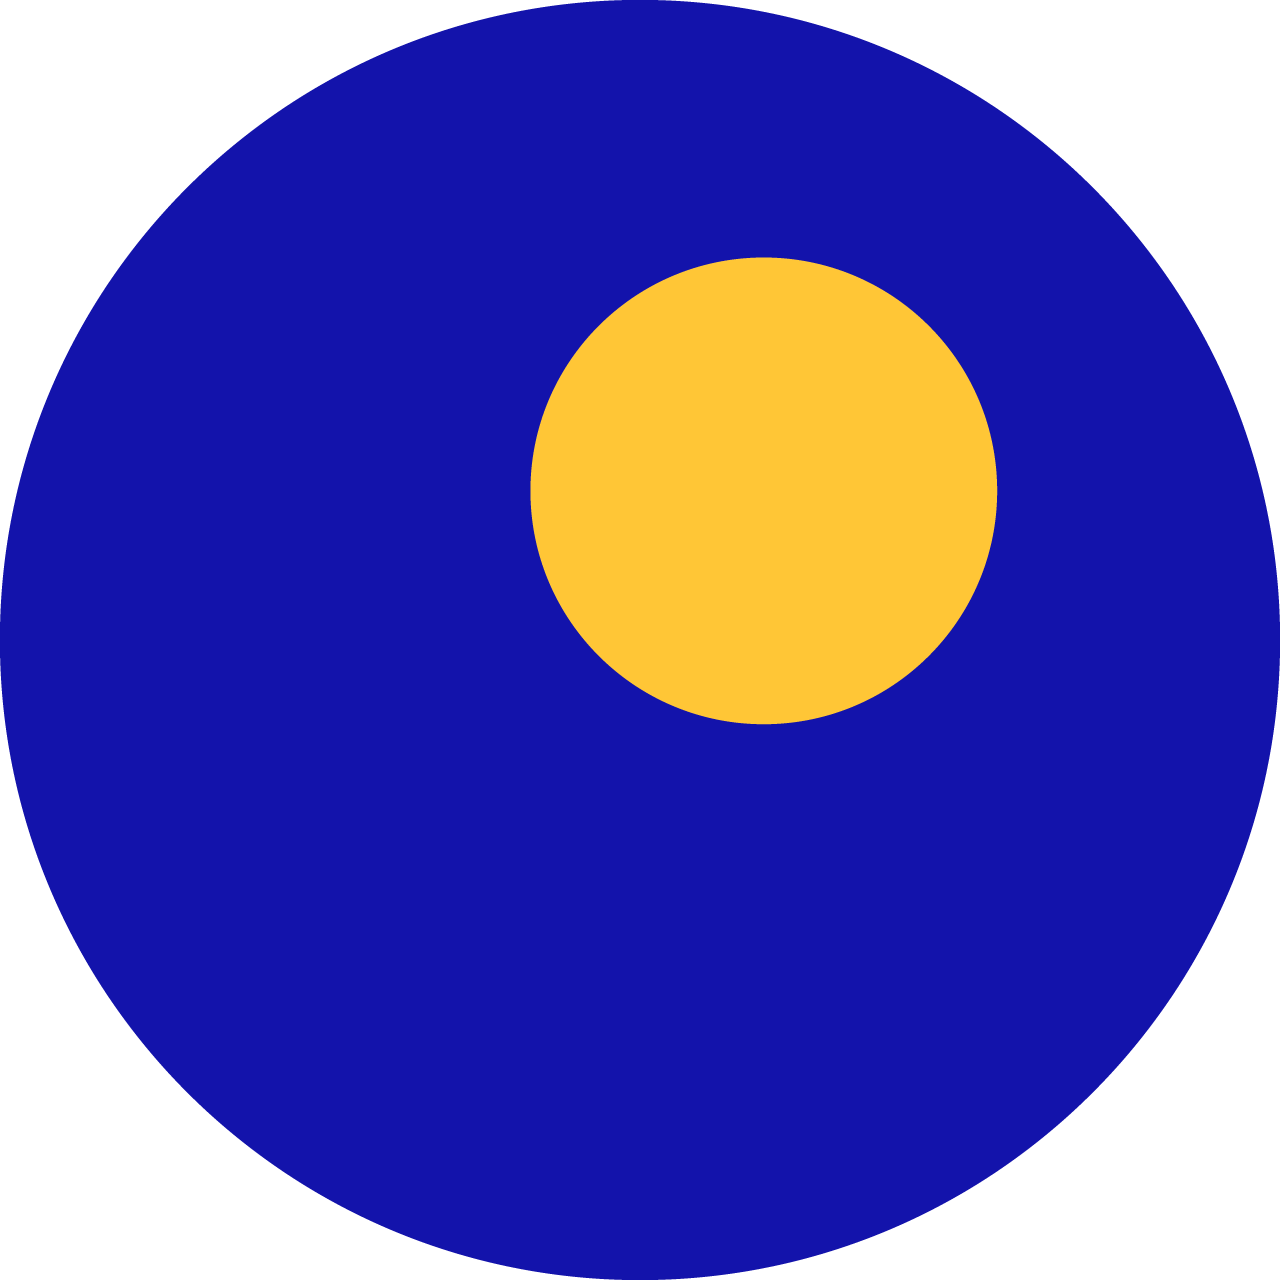 My logo shows a blue circle with a smaller yellow circle in the upper right area. Like an eye looking up at the blue sky with a bright sun.